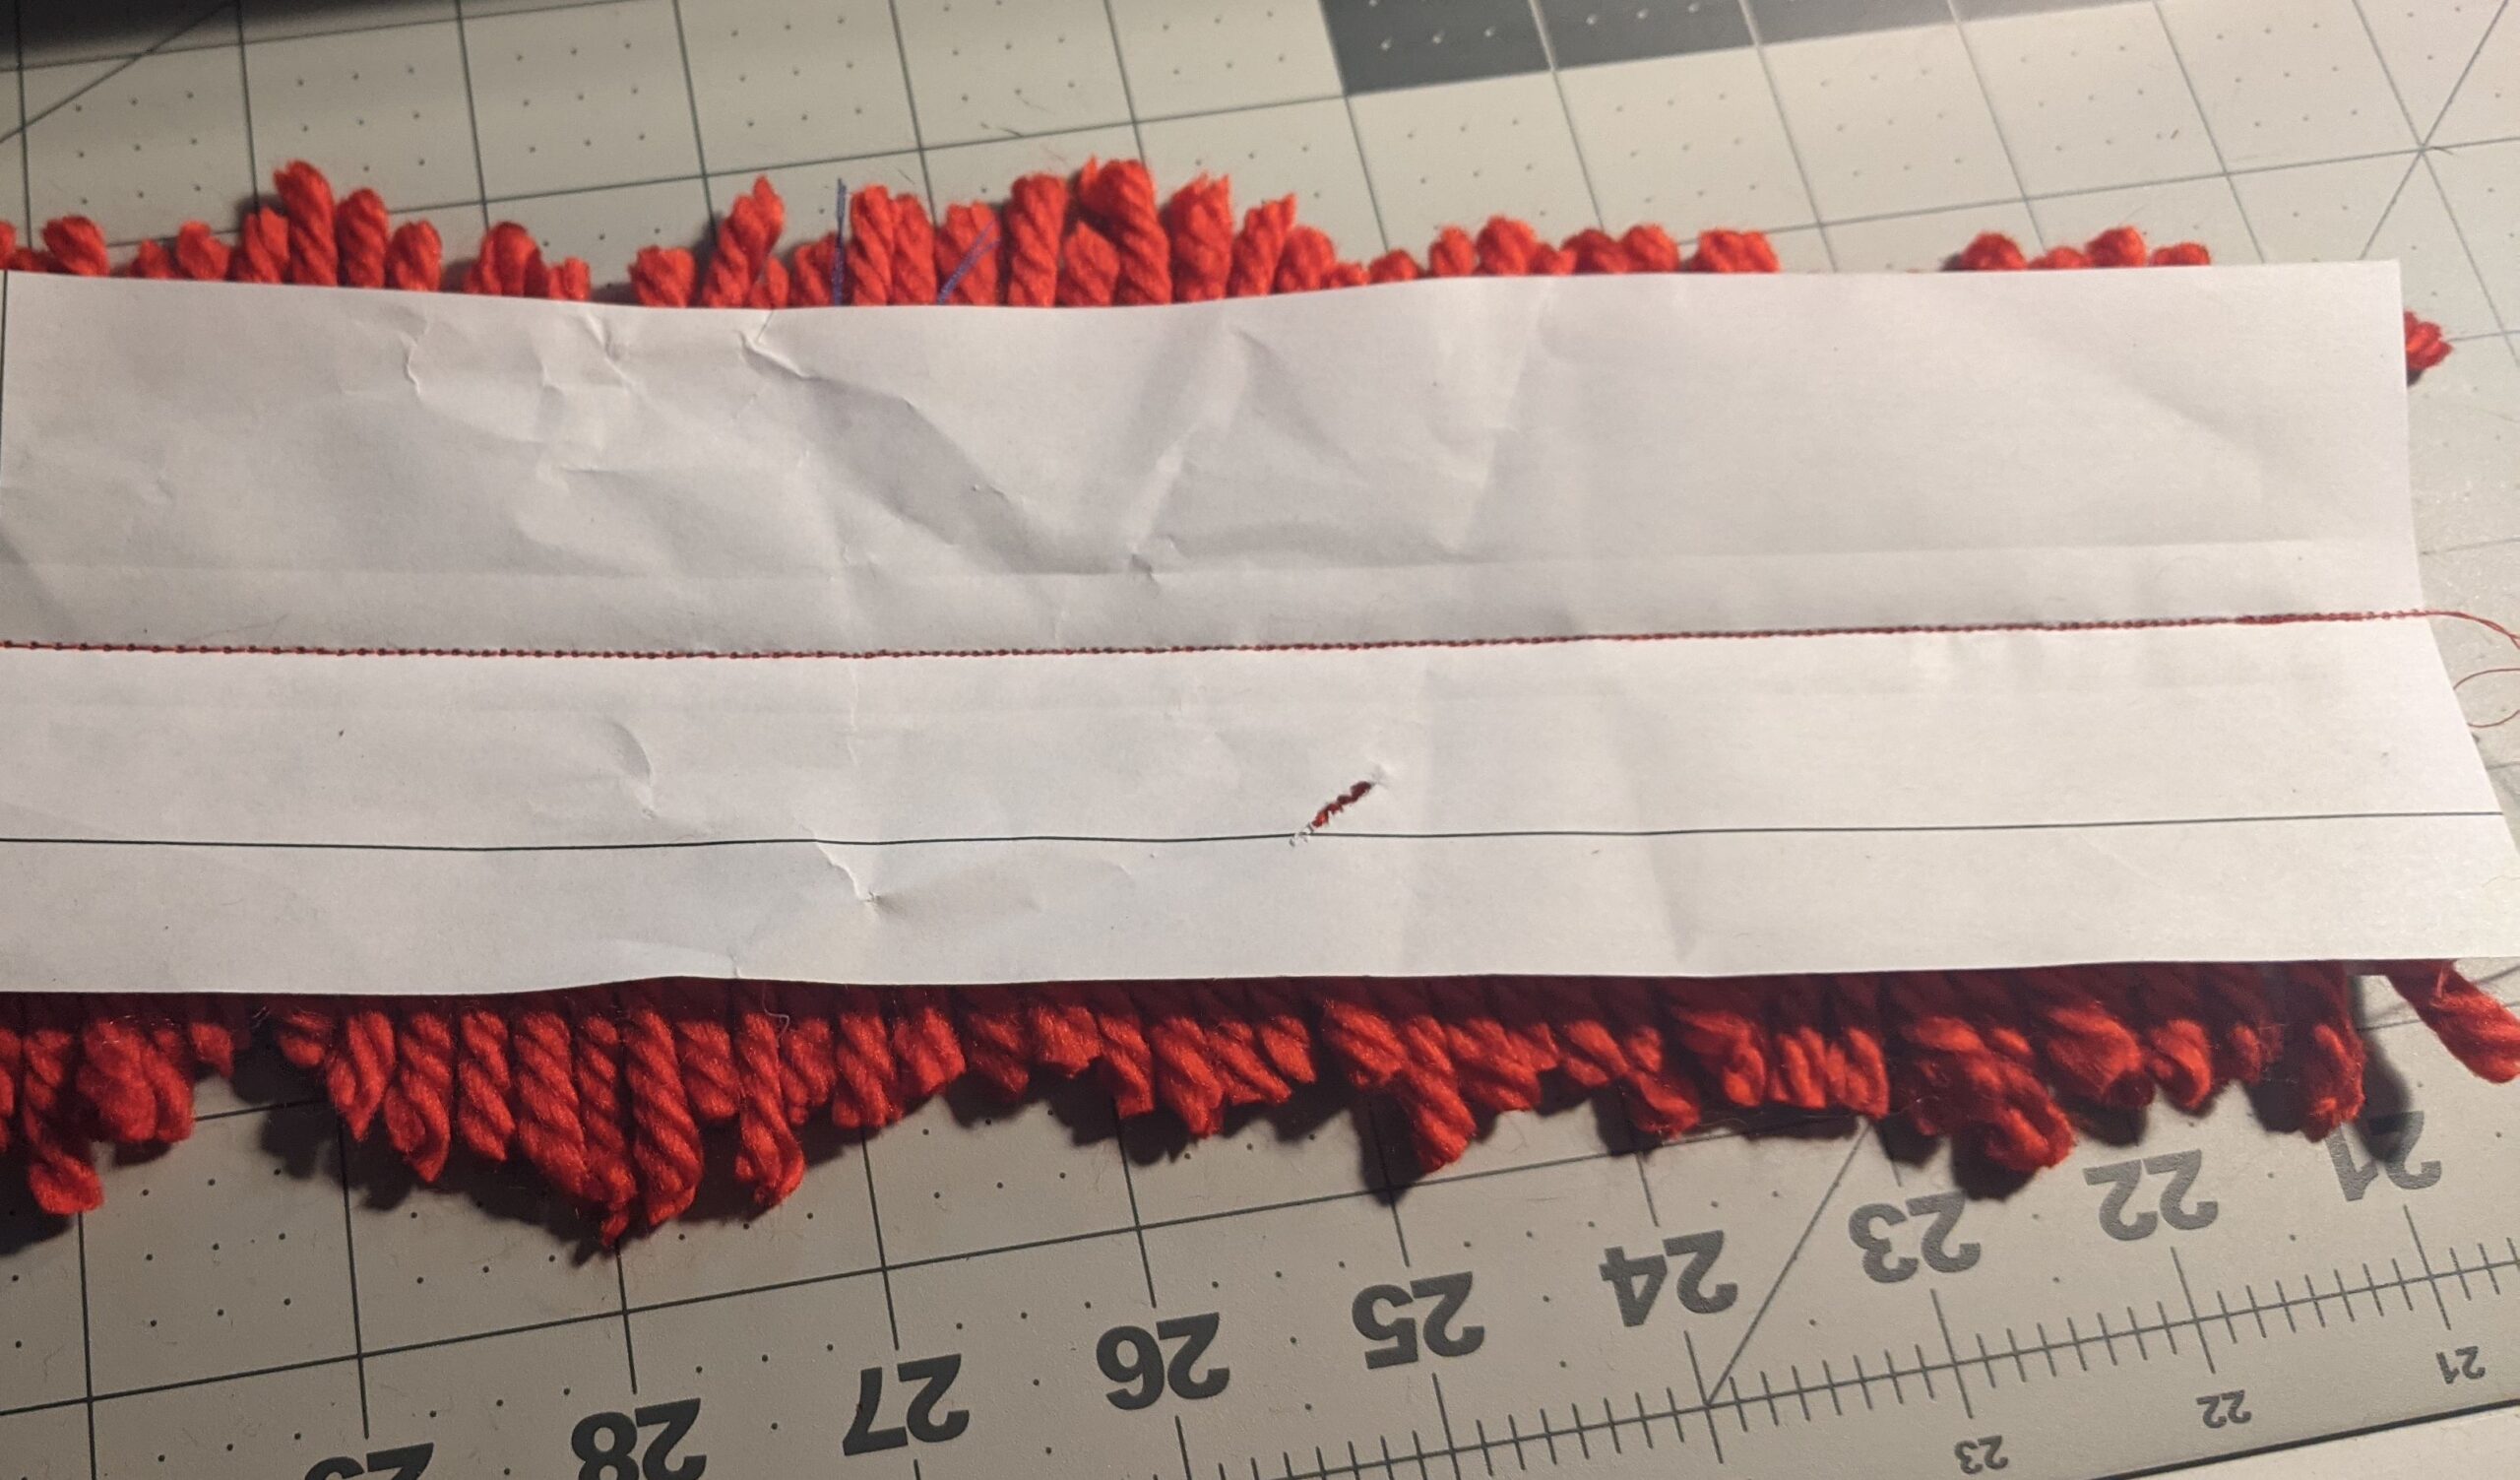 Red yard sewn side by-side to paper, showing stitching. On a cutting board.